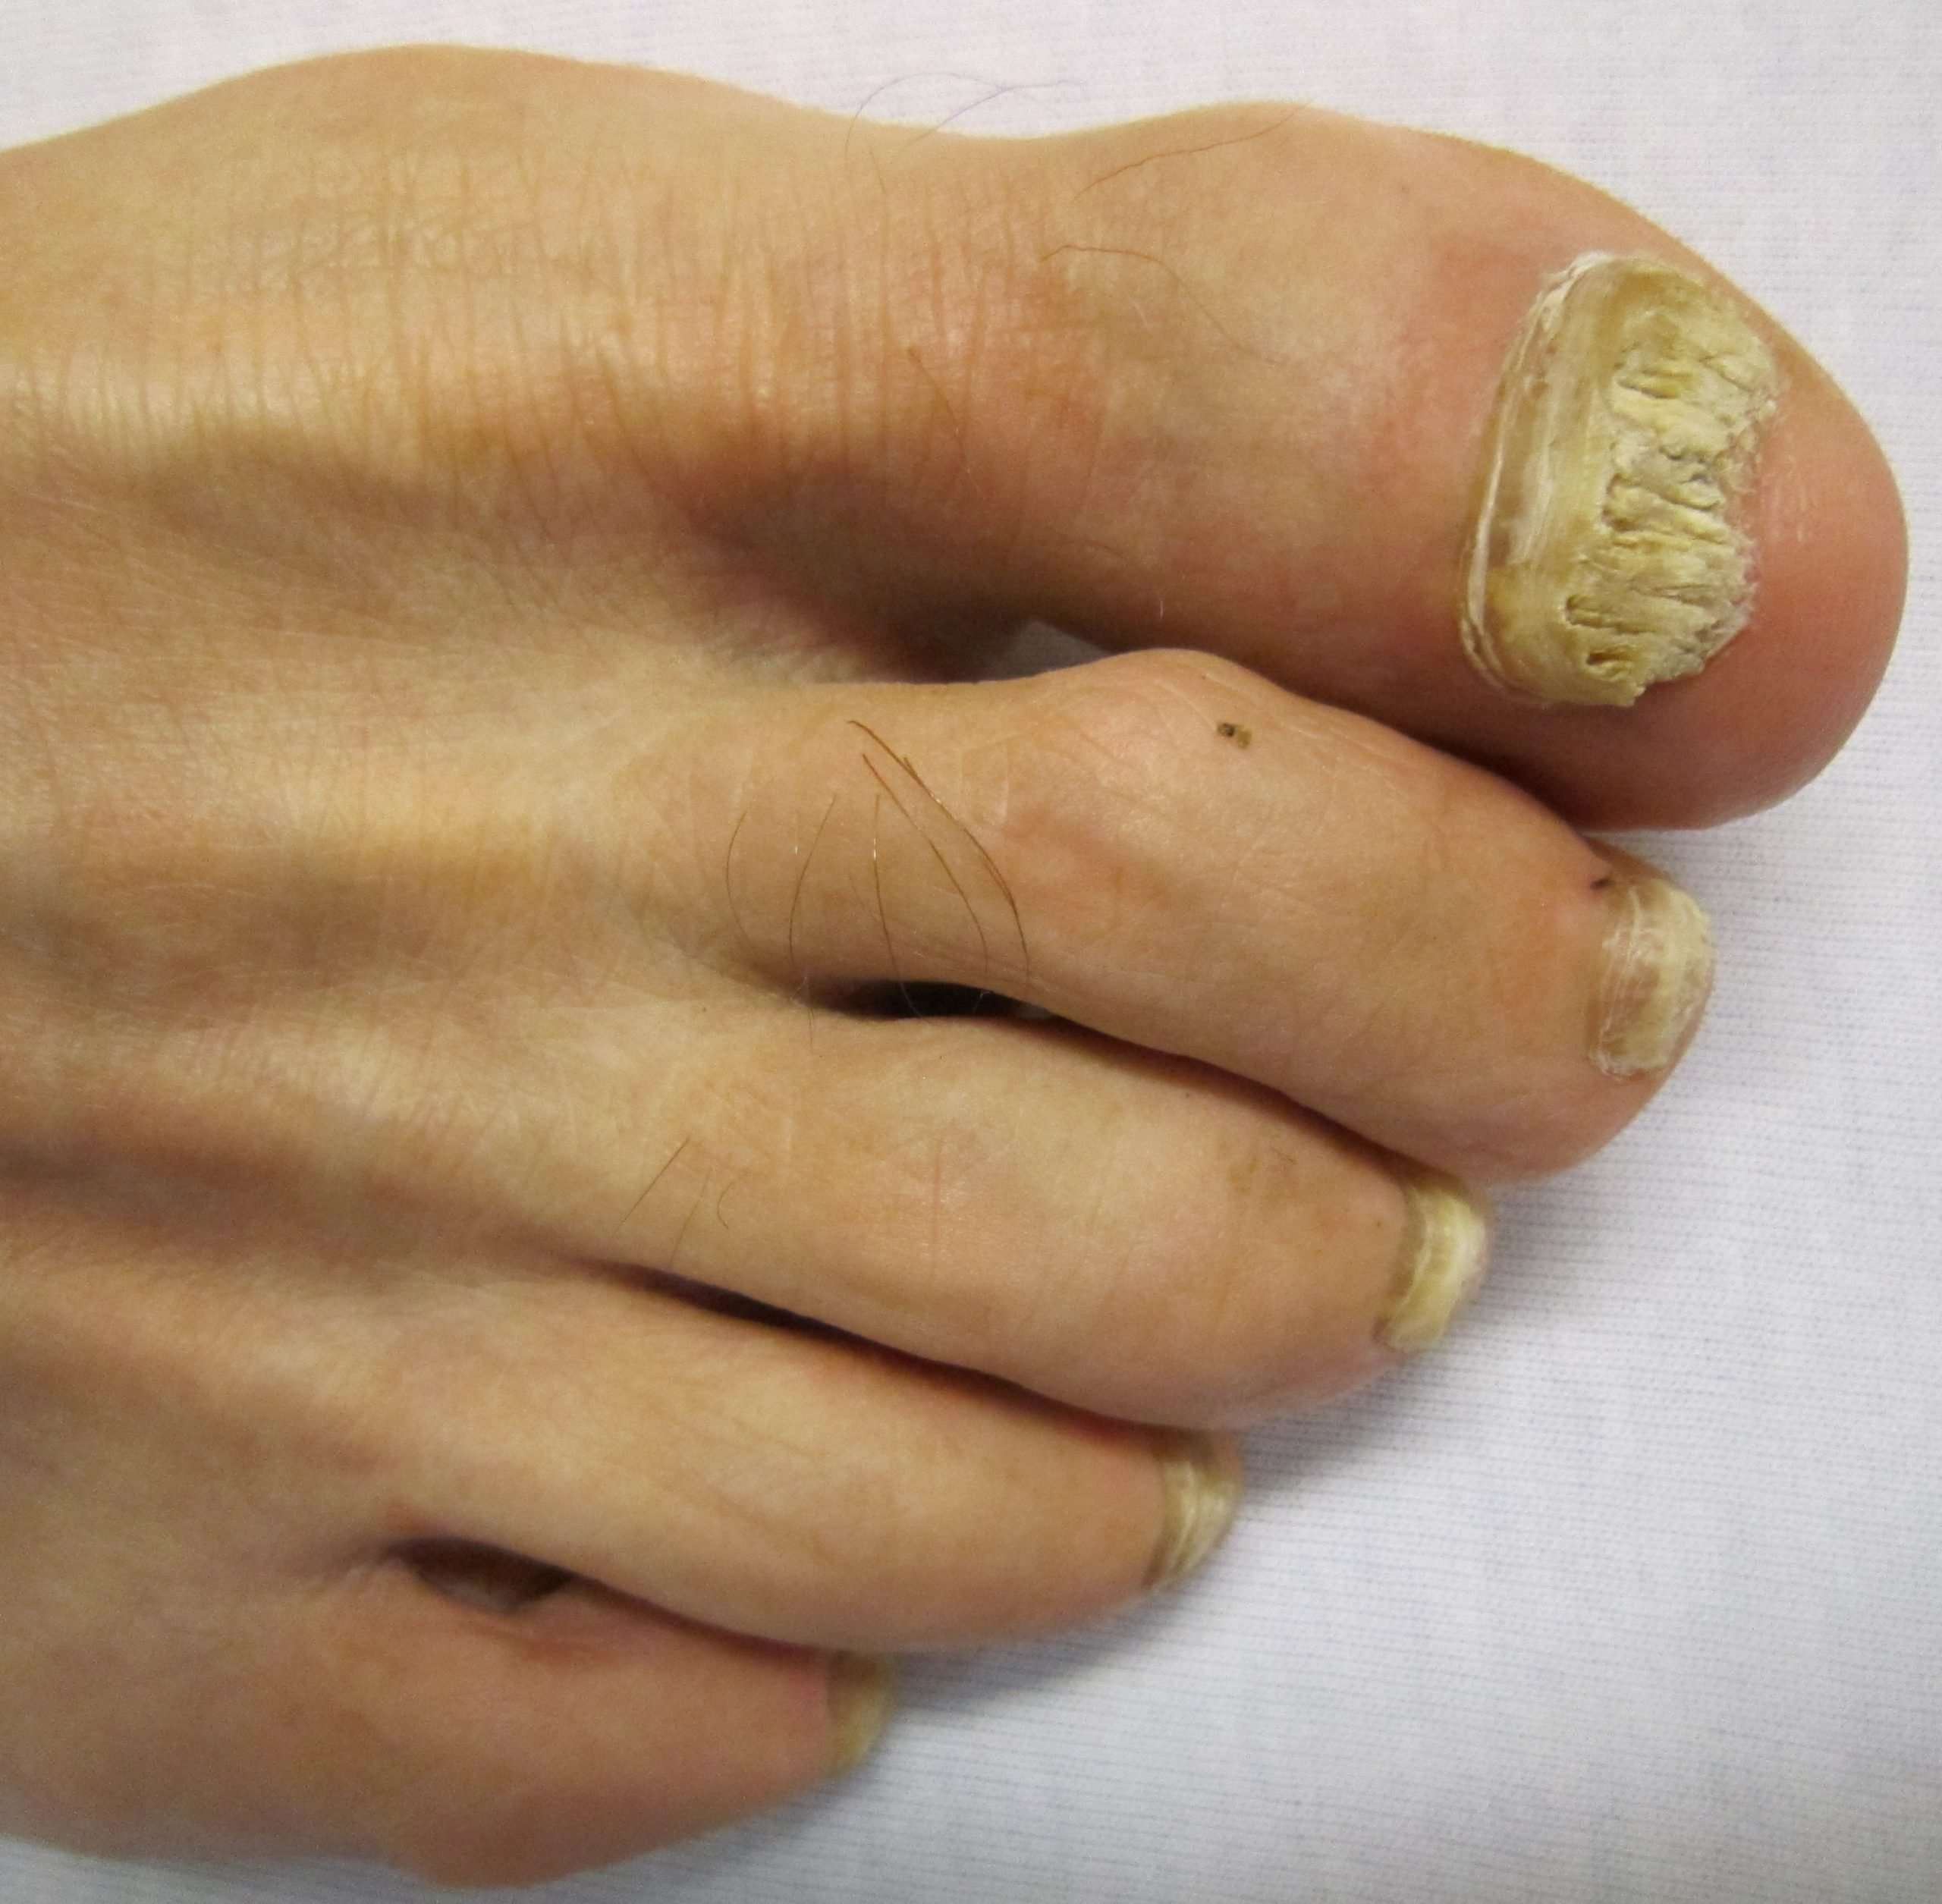 Fungal nail infection. Causes, symptoms, treatment Fungal ...